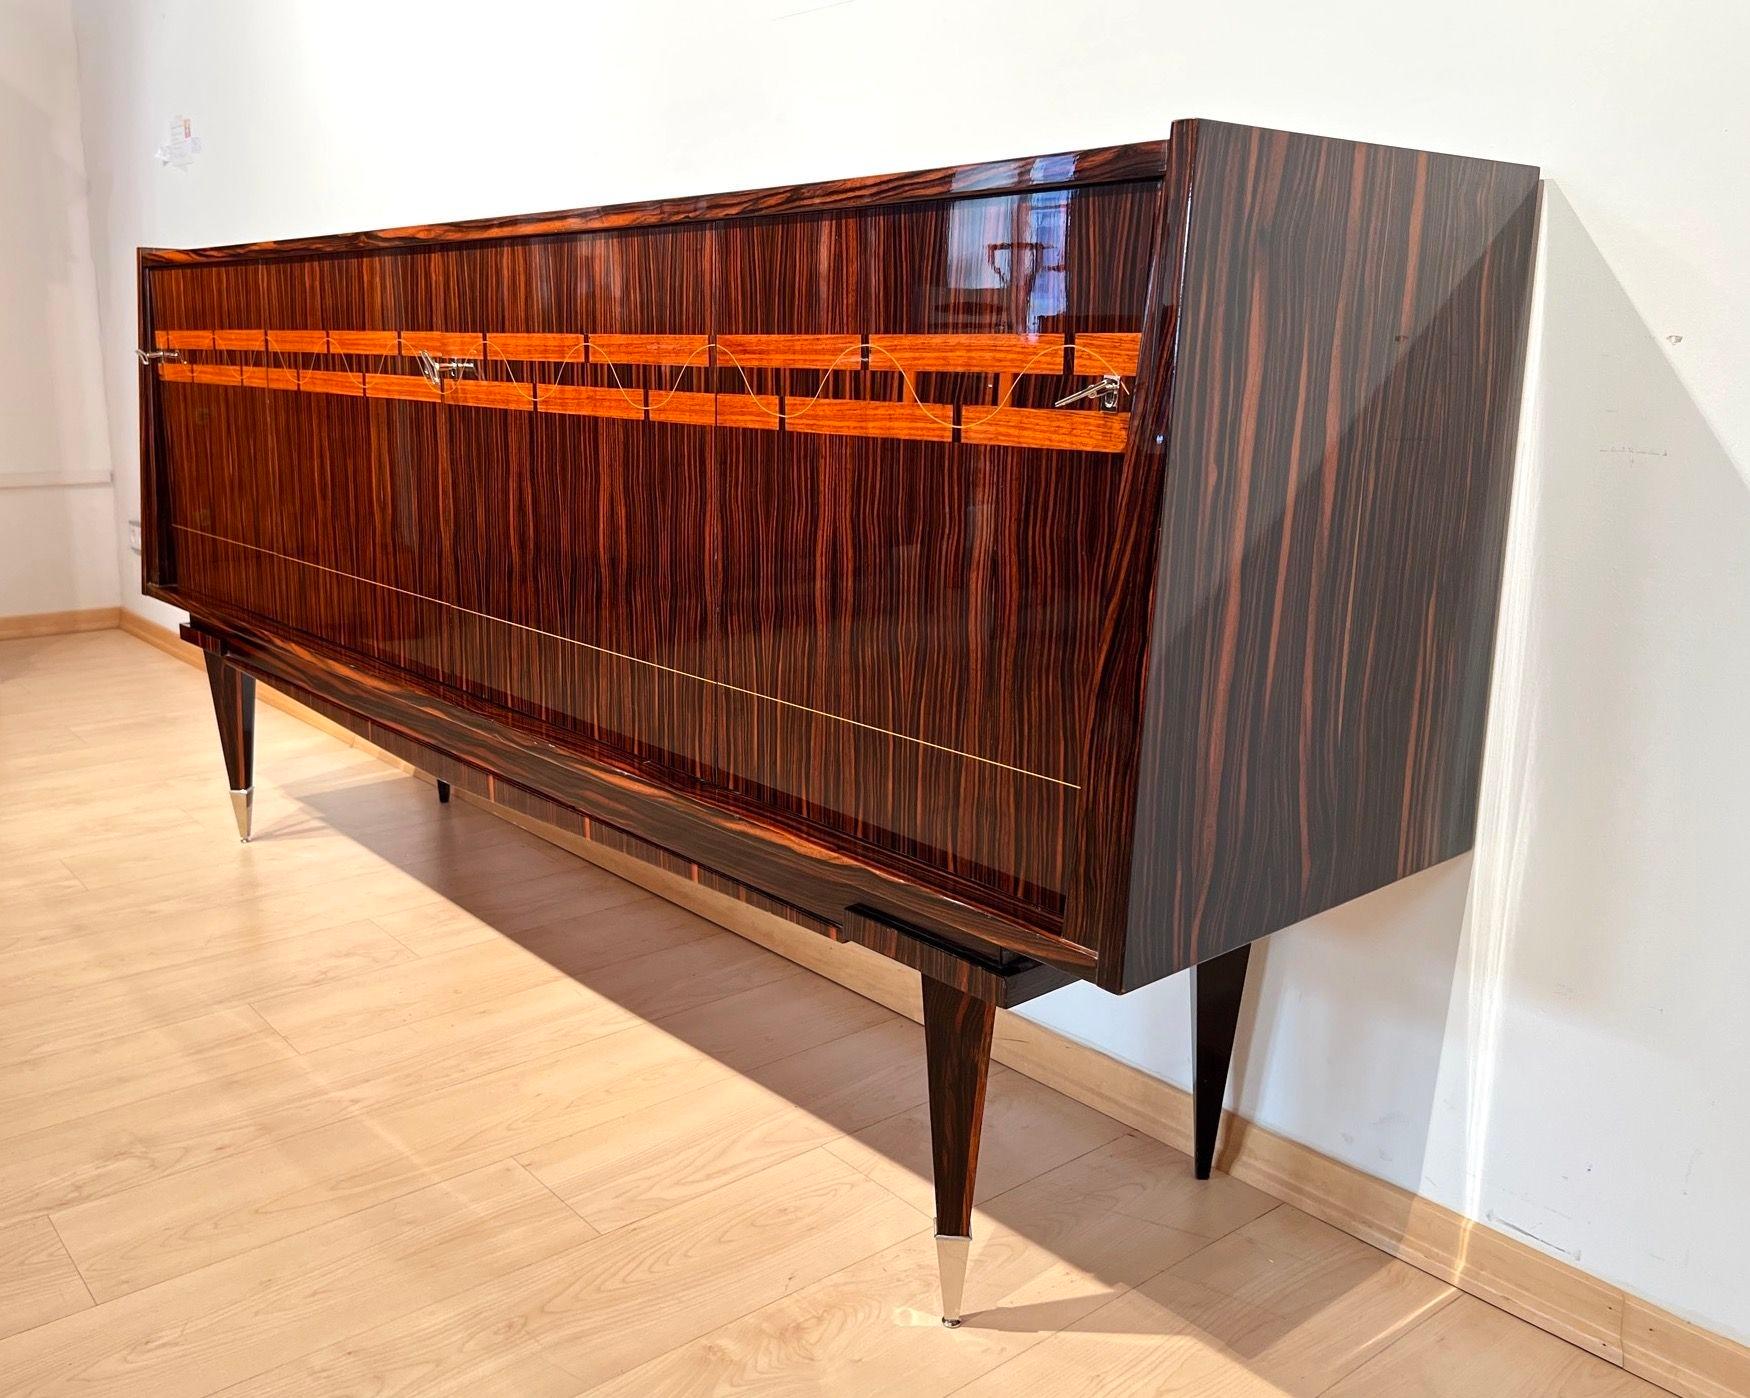 Large modernist Design Sideboard in Macassar Ebony by NF Ameublement from France circa 1960.
* Elegant modern design.
* Gorgeous Macassar Ebony veneer. Inlaid in maple on the front of the doors.
* Lacquered and high-gloss pished.
* Standing on